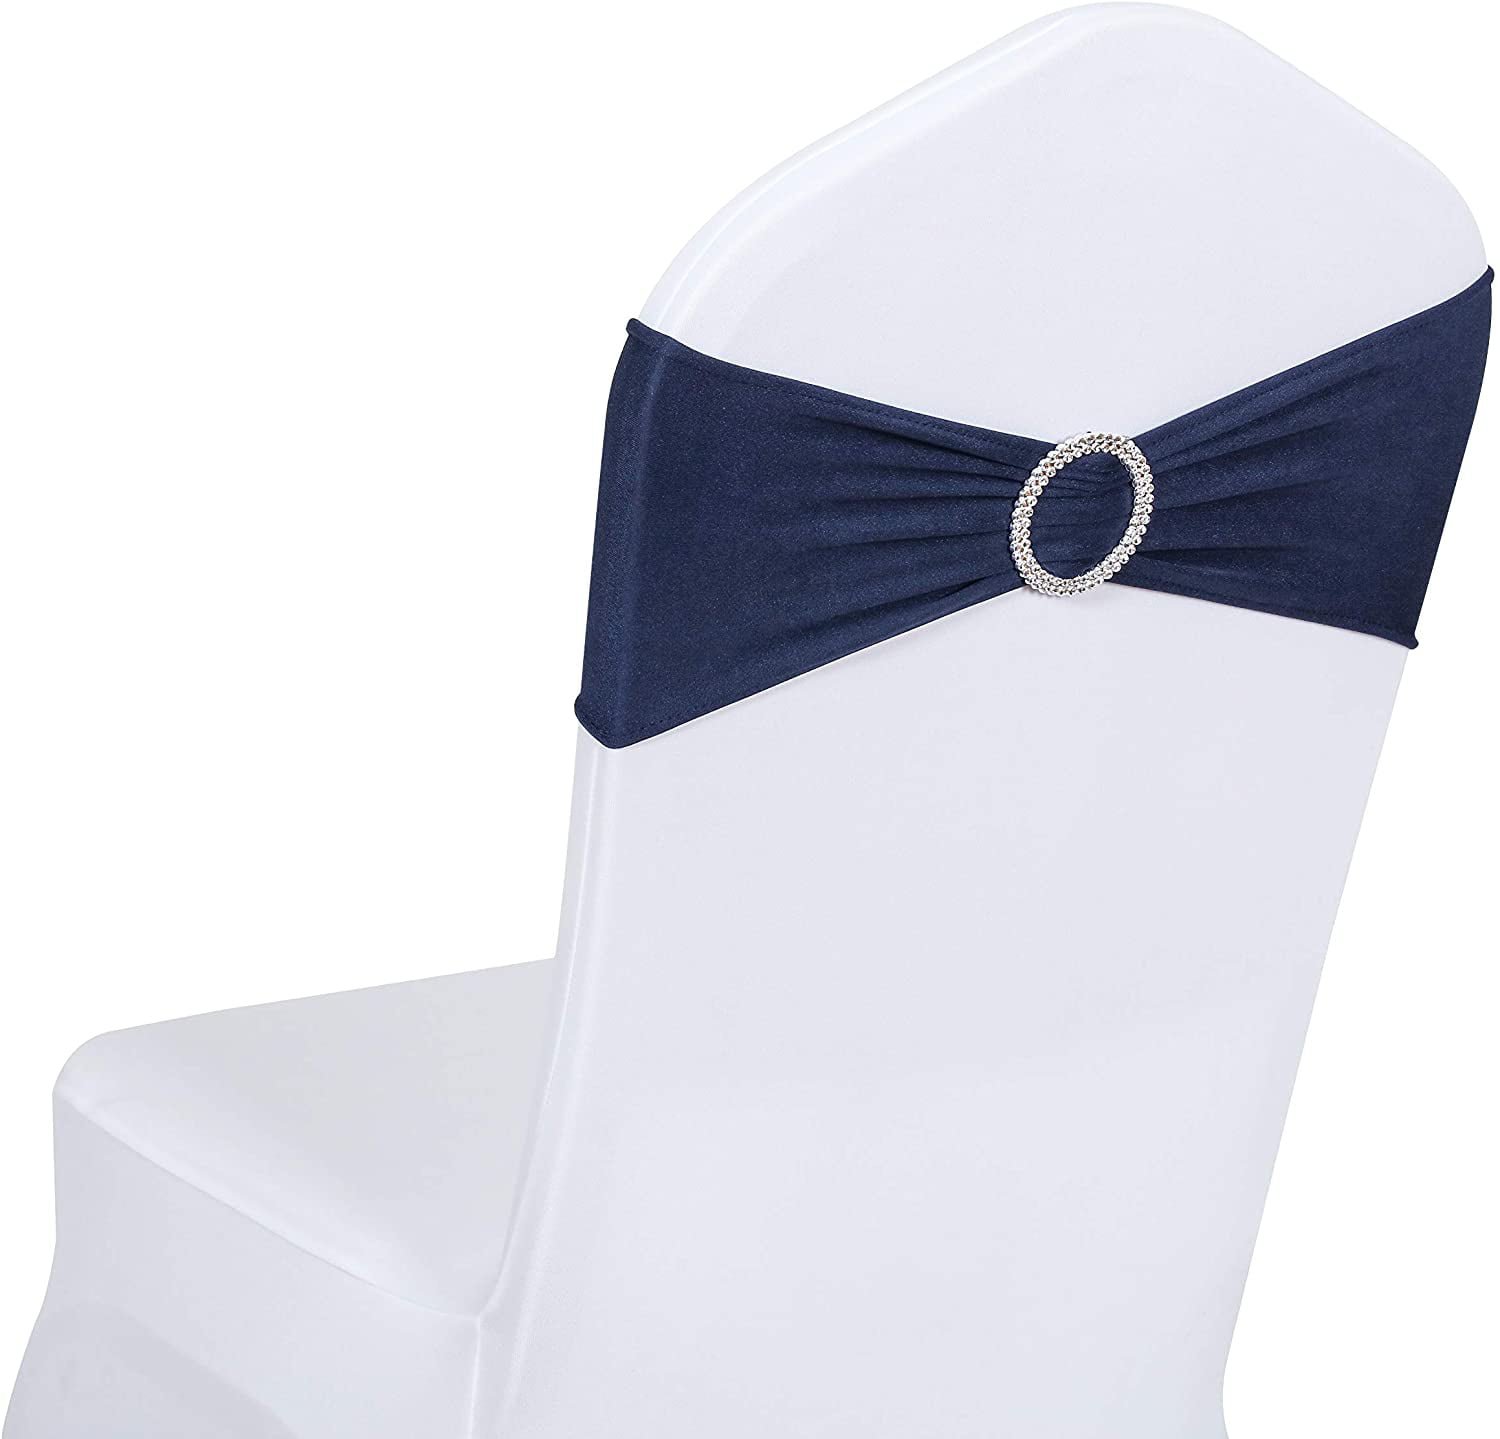 1Pcs Spandex Stretch Wedding Chair Cover Bow Band Sashes With Buckle Slider NEW 